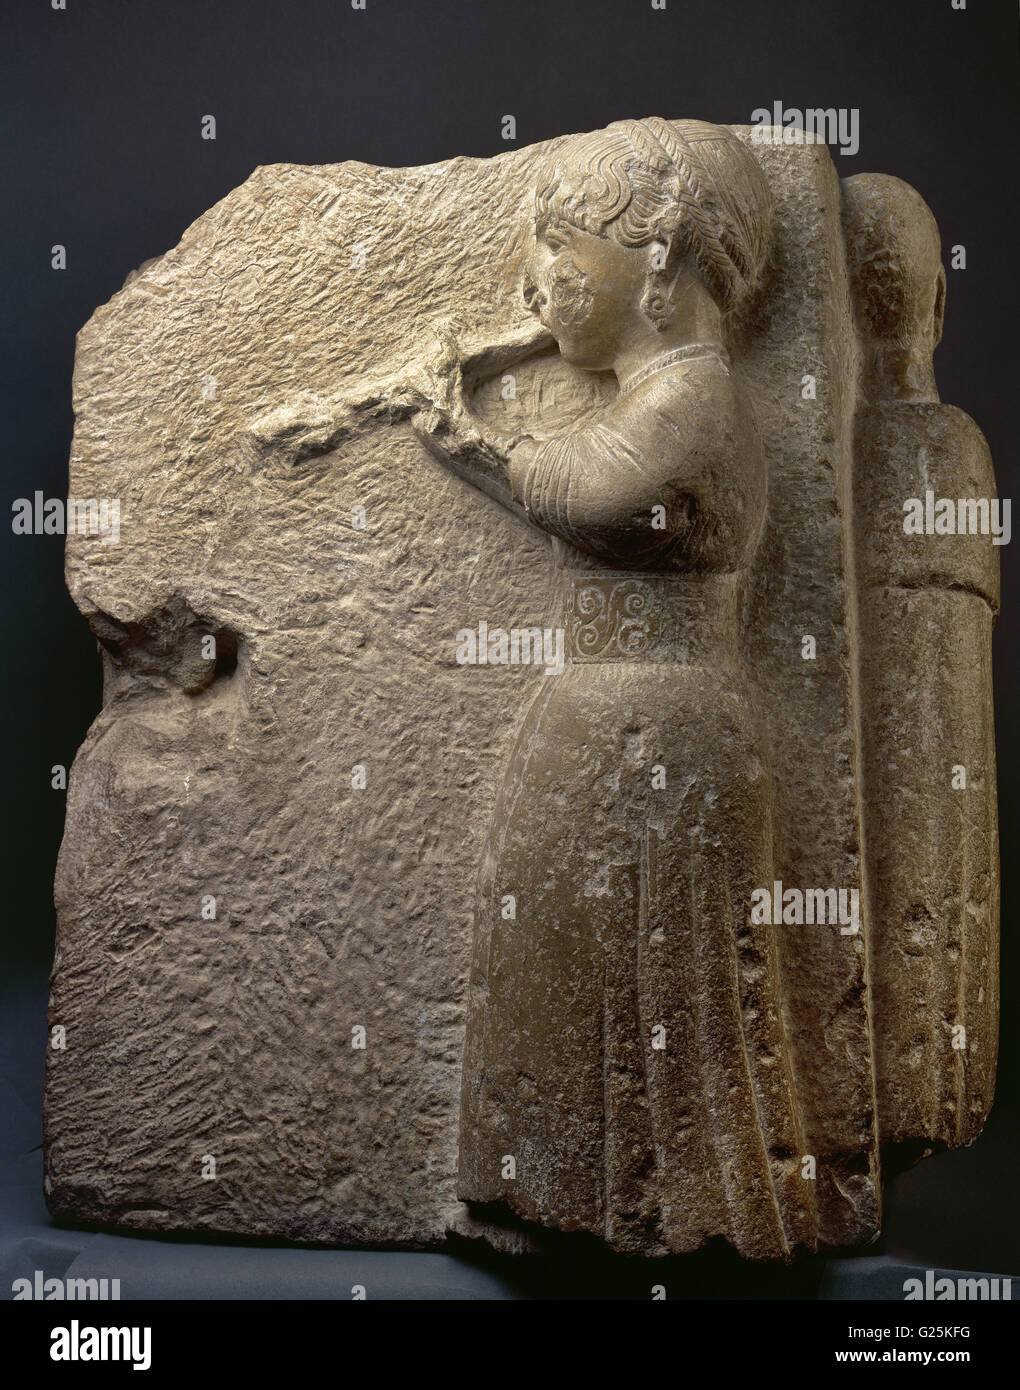 Iberian frieze relief depicting a woman or auletris dressed with tunic tied at the waist  playing a flute named aulos. In the hair, double braid around the head. From Osuna (Sevilla province, Andalusia). 3rd century - 2nd century BC. National Archaeological Museum. Madrid. Spain. Stock Photo